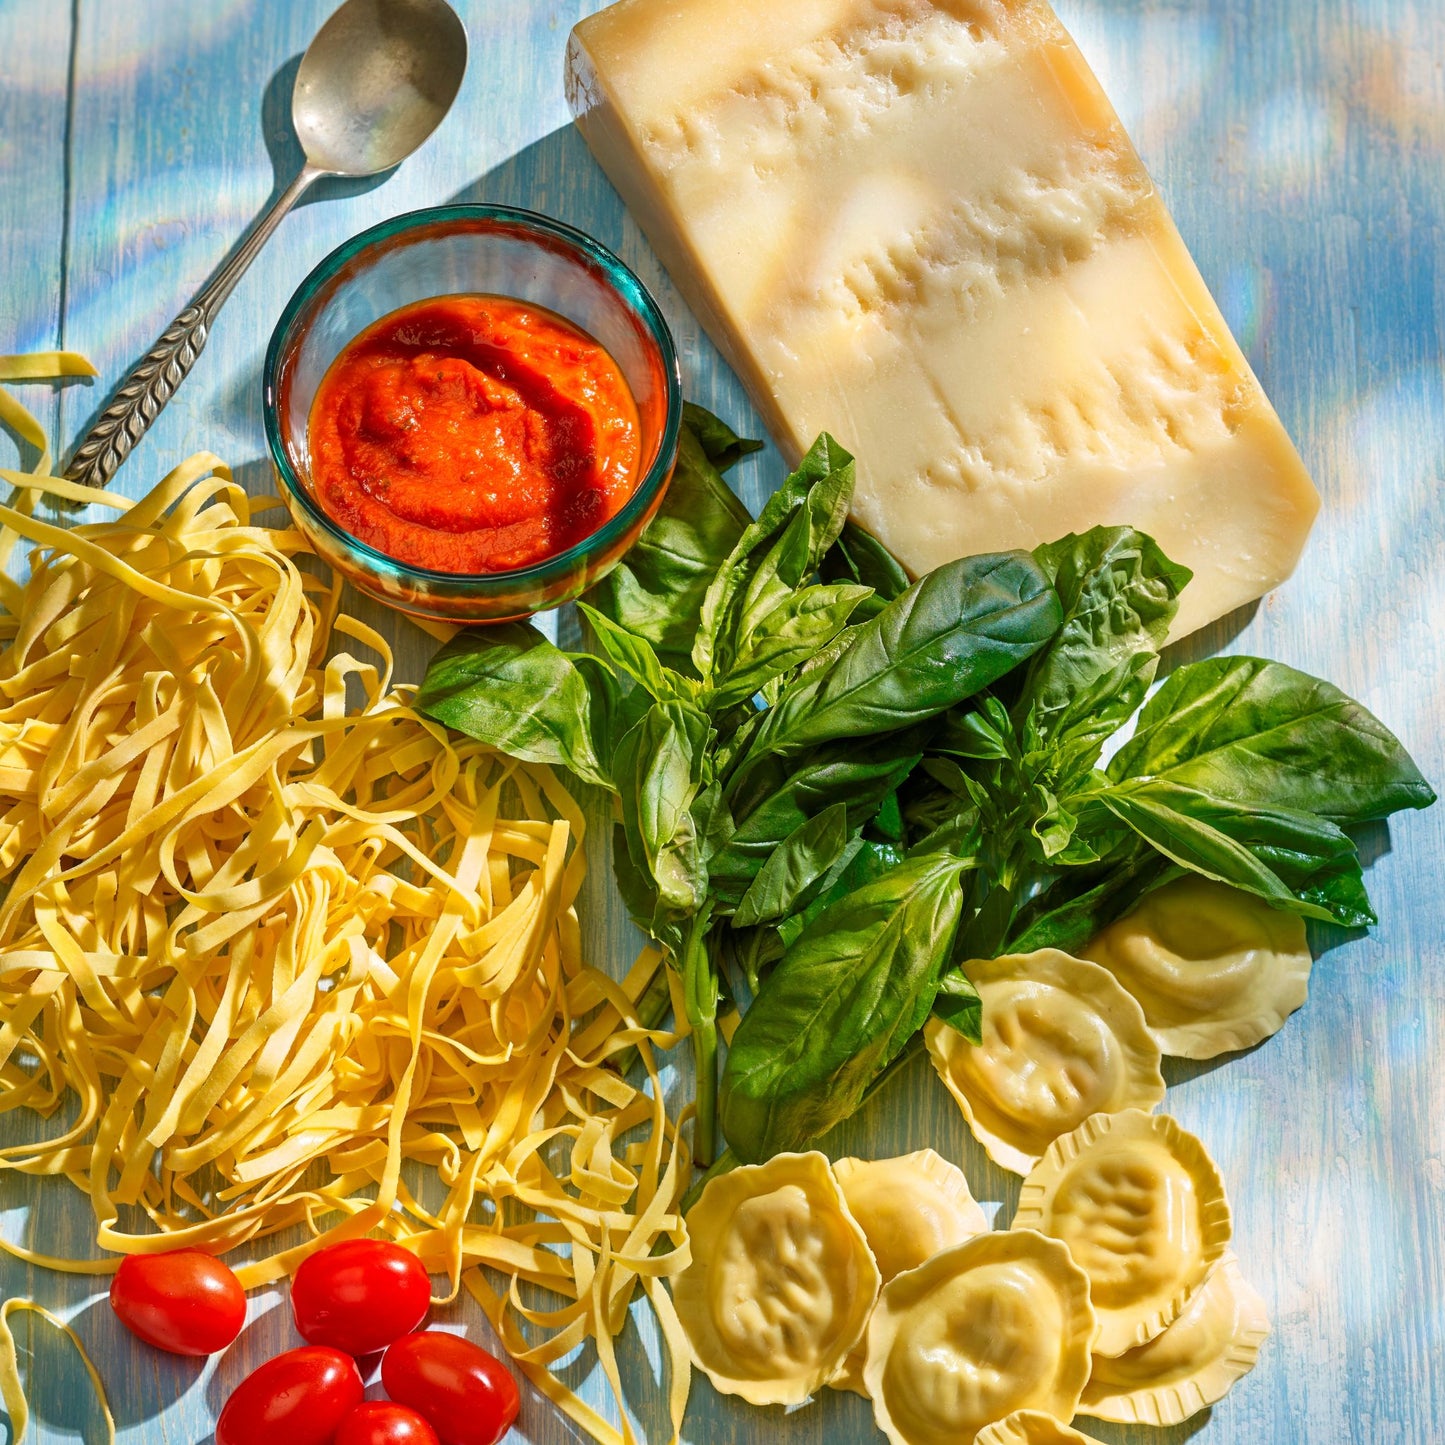 Different types of pasta laid out on a board with fresh basil, tomato sauce and cheese.